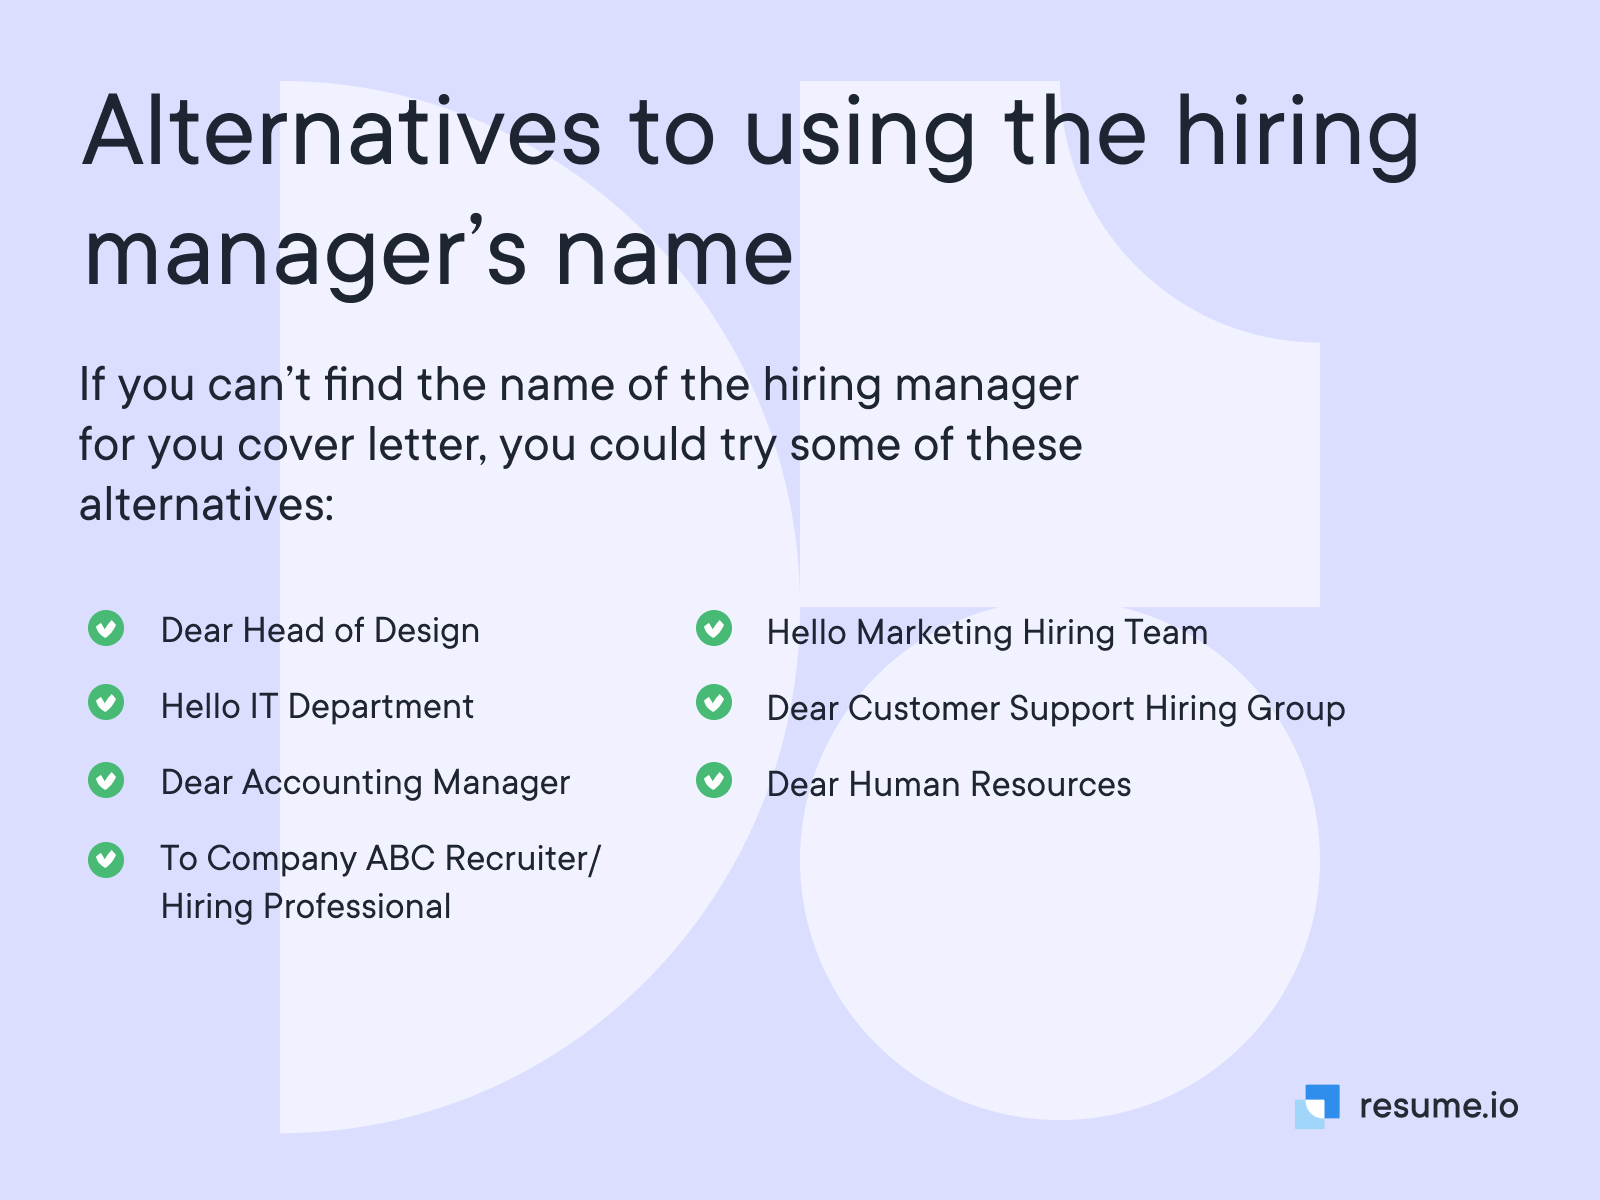 Using the hiring manager's name